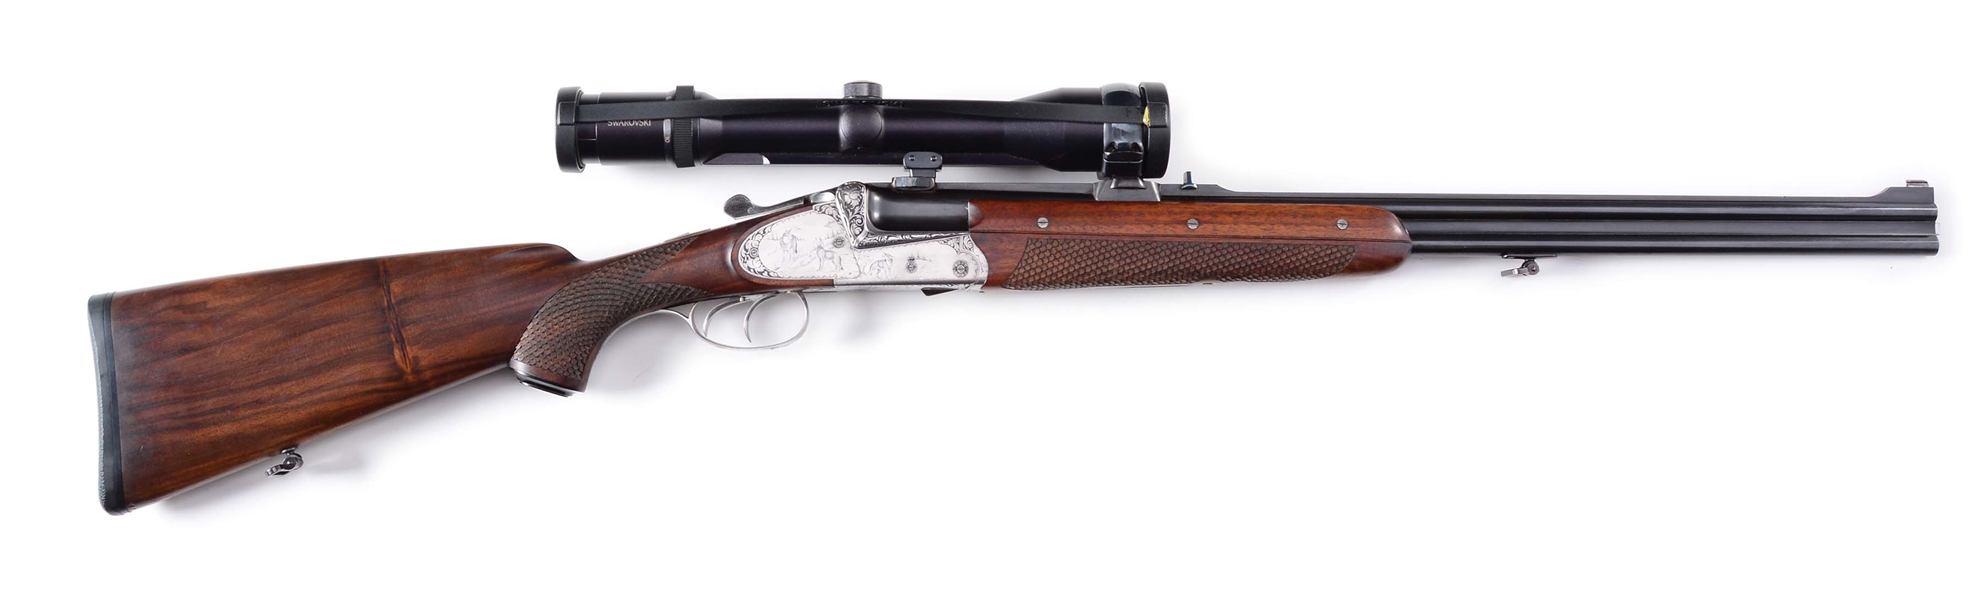 (M) OVER - UNDER SIDEPLATED BLITZ ACTION EJECTOR 30-06 DOUBLE RIFLE OF SUPERIOR QUALITY BY BERNHARD FRITZ HAVING EXCEPTIONAL WESTERN AMERICAN GAME SCENE ENGRAVINGS BY OBERDORFER WITH SWAROVSKI SCOPE.